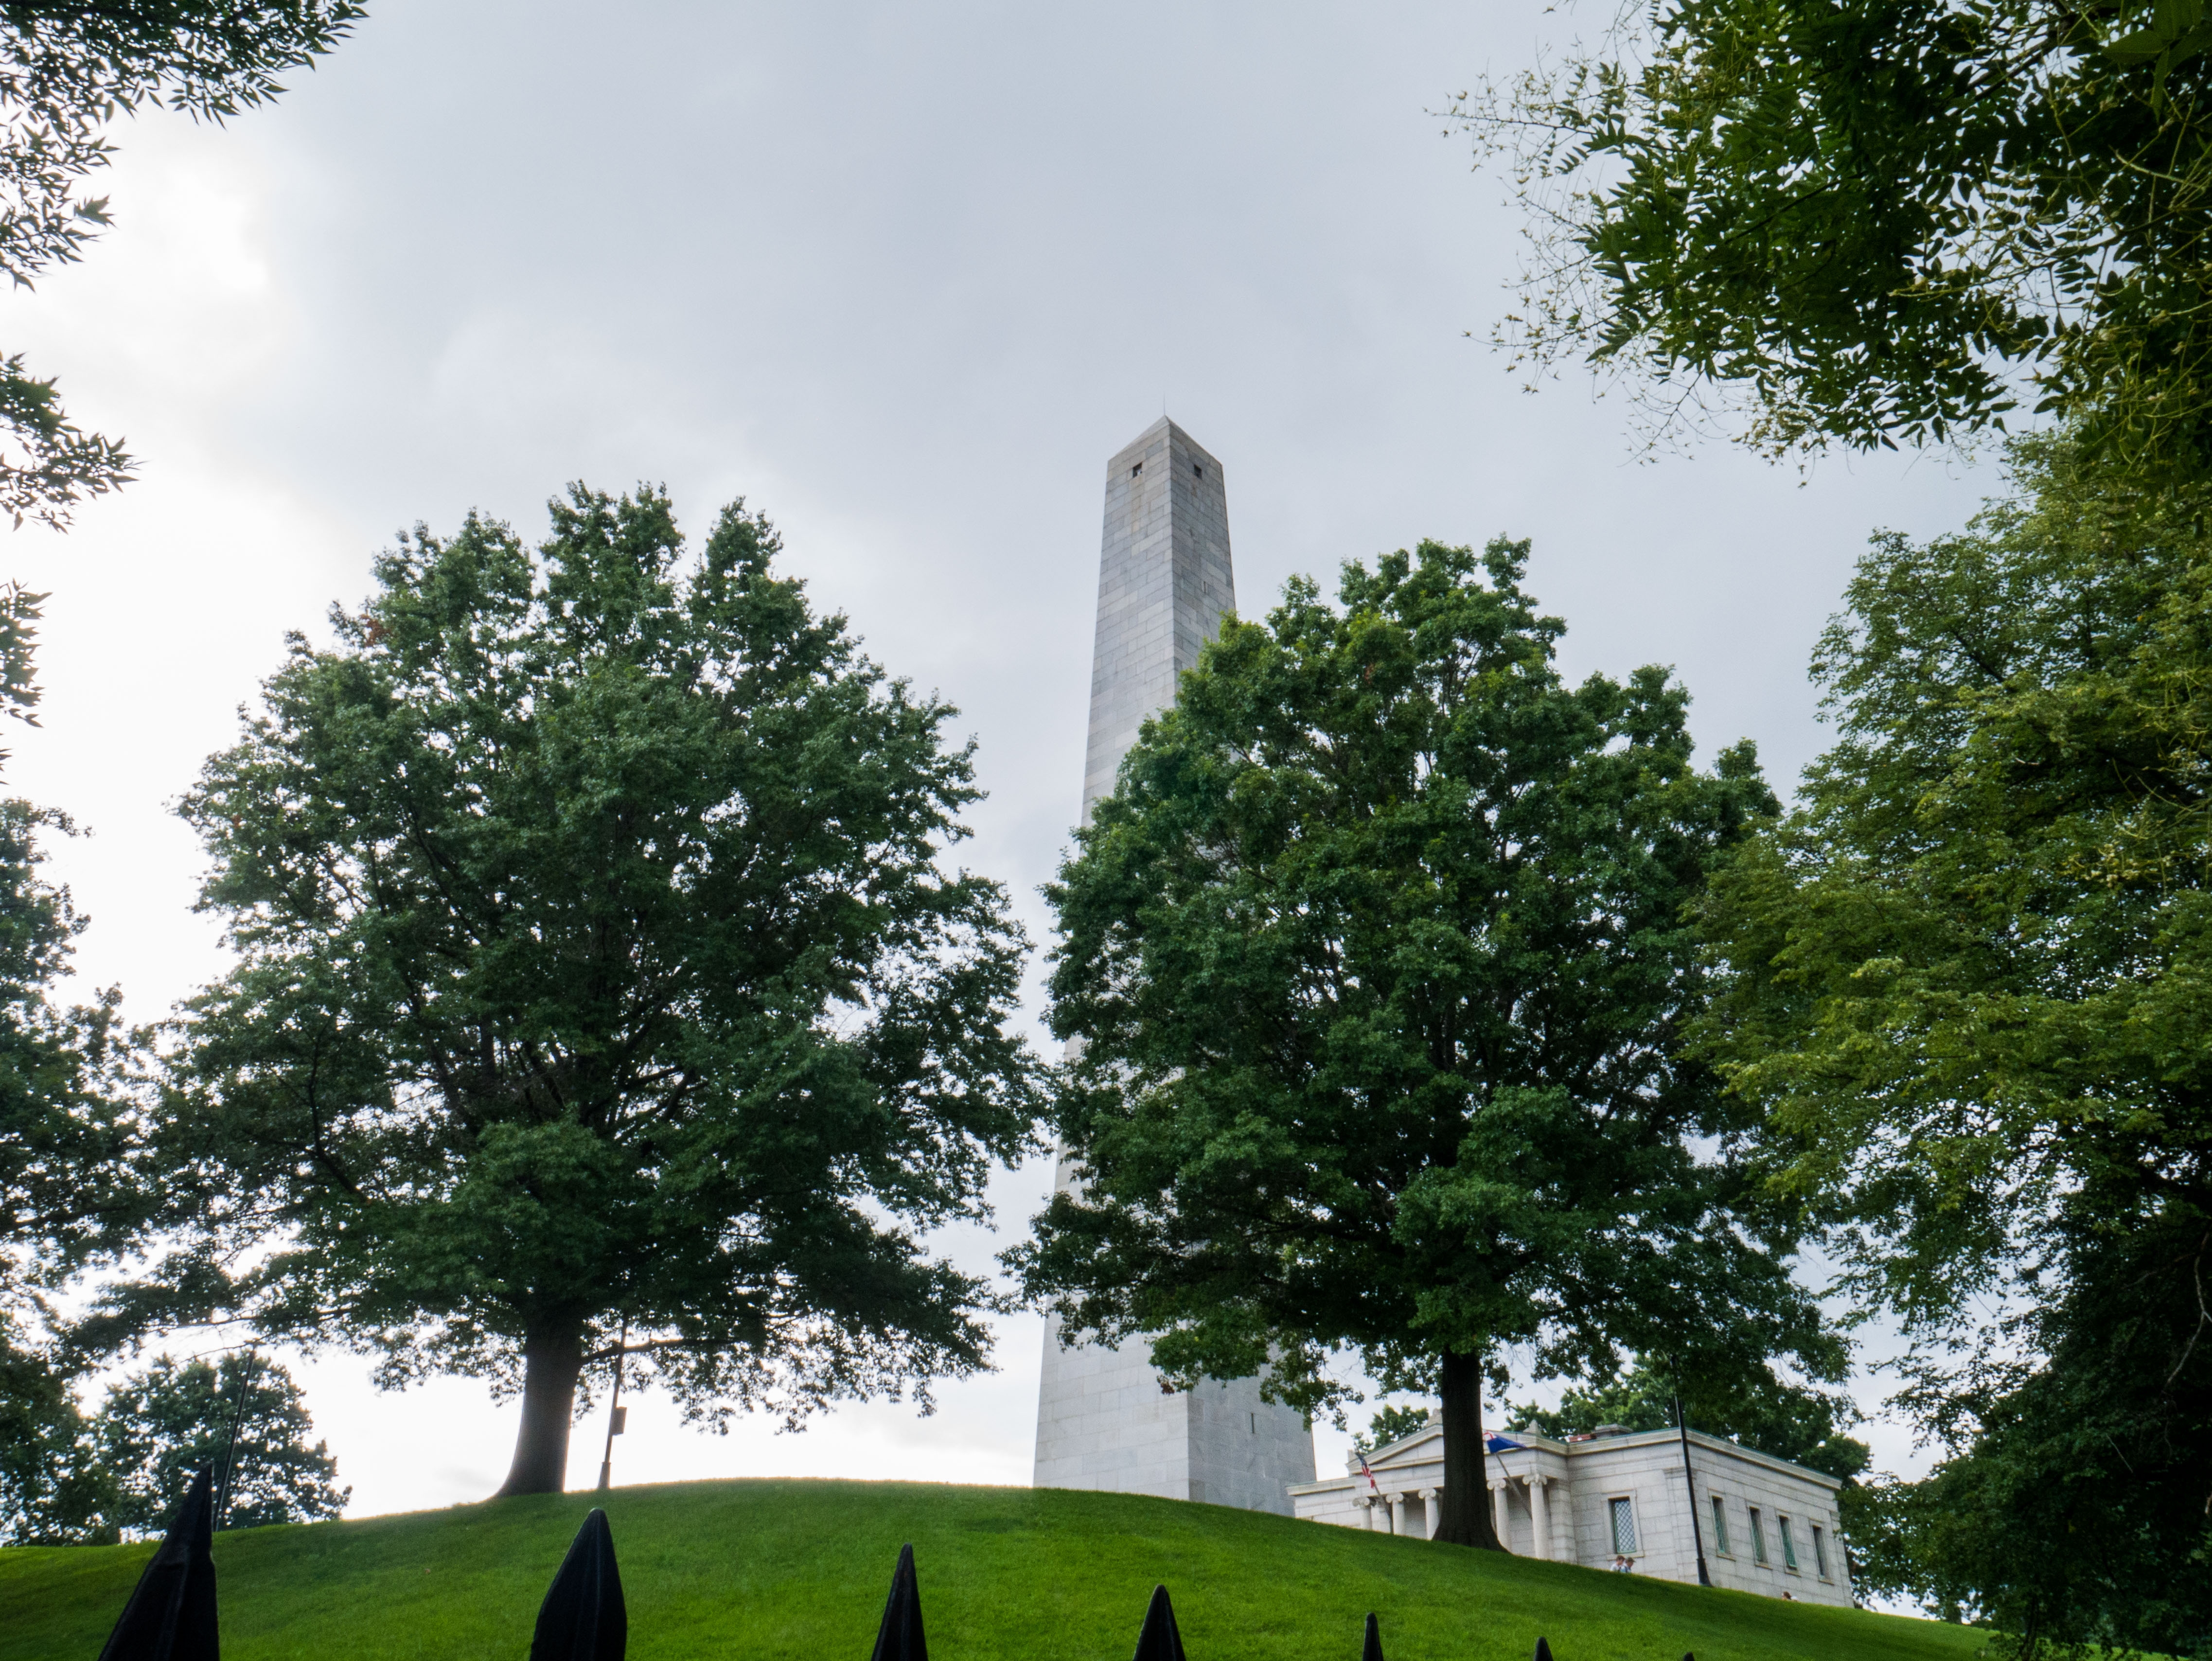 The monument at Bunker Hill